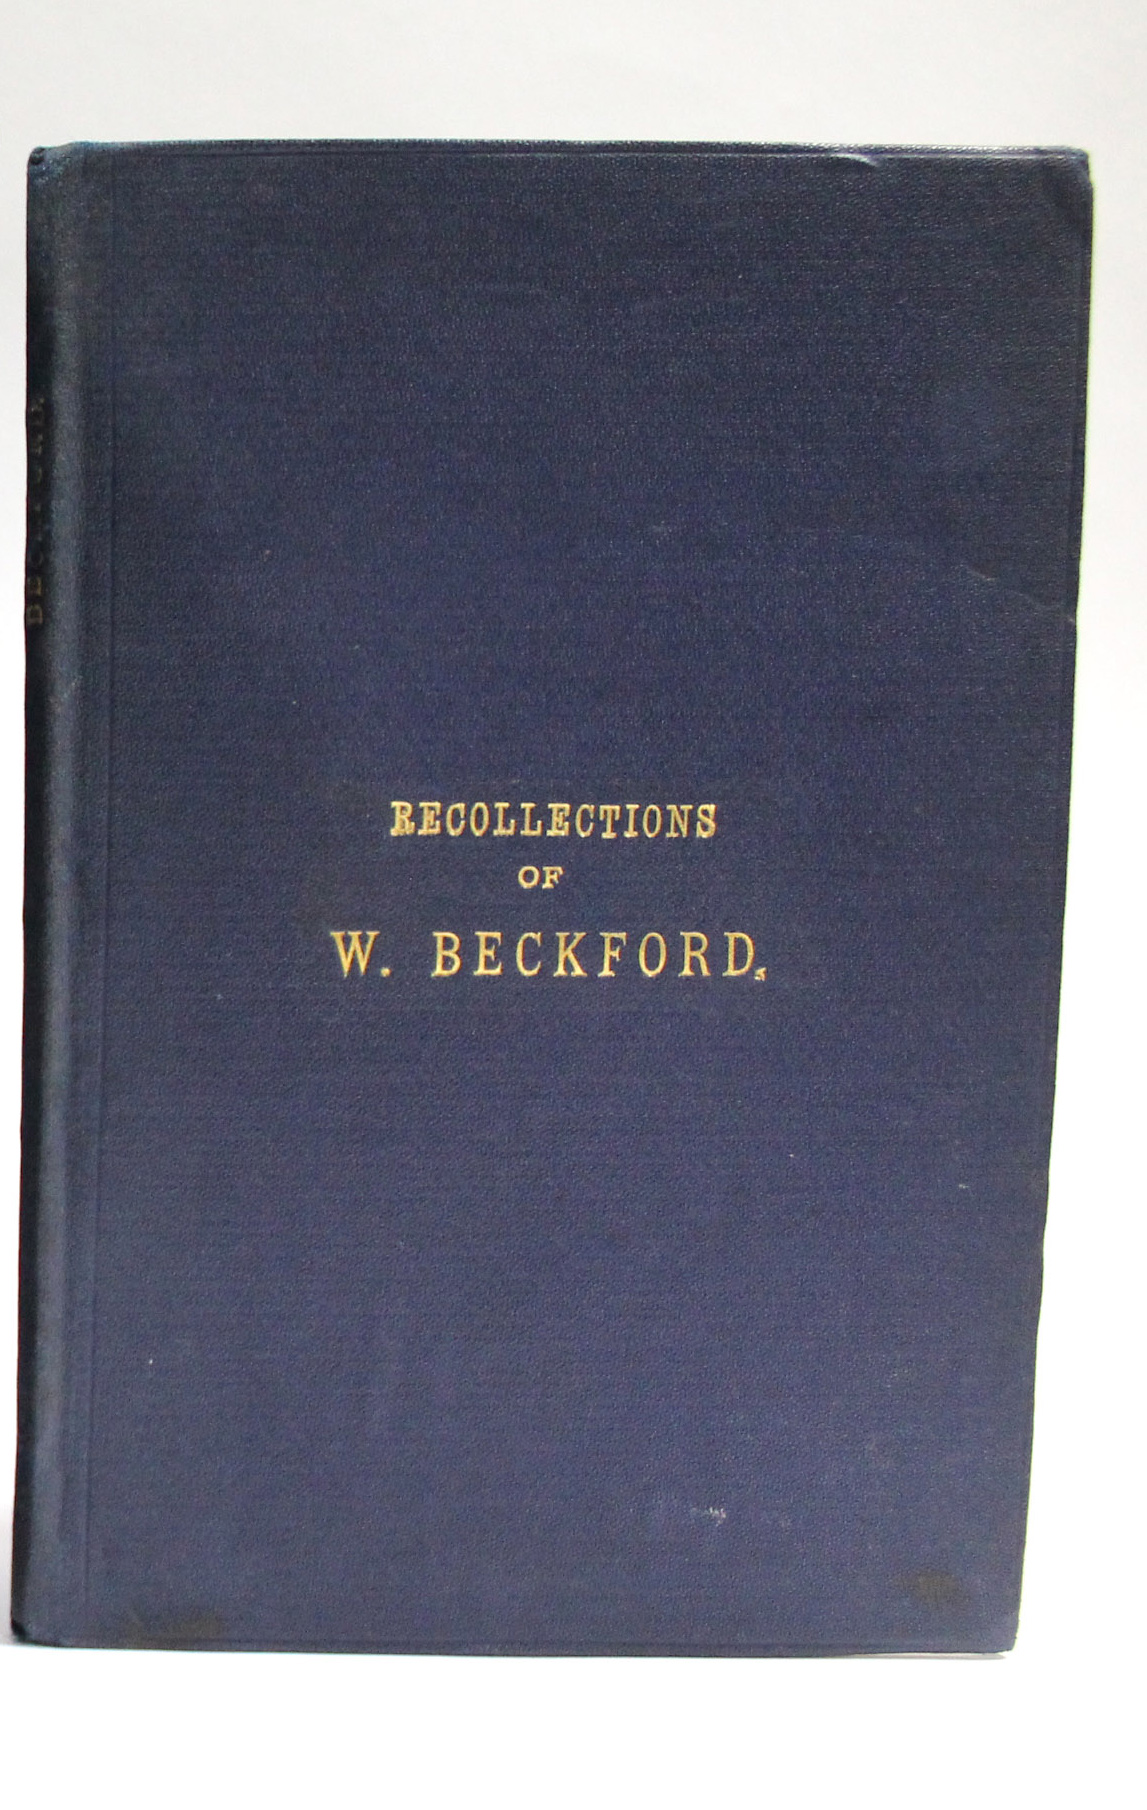 LANSDOWN, William; “Recollections of the Late William Beckford of Fonthill, Wilts., & Lansdown, Bath